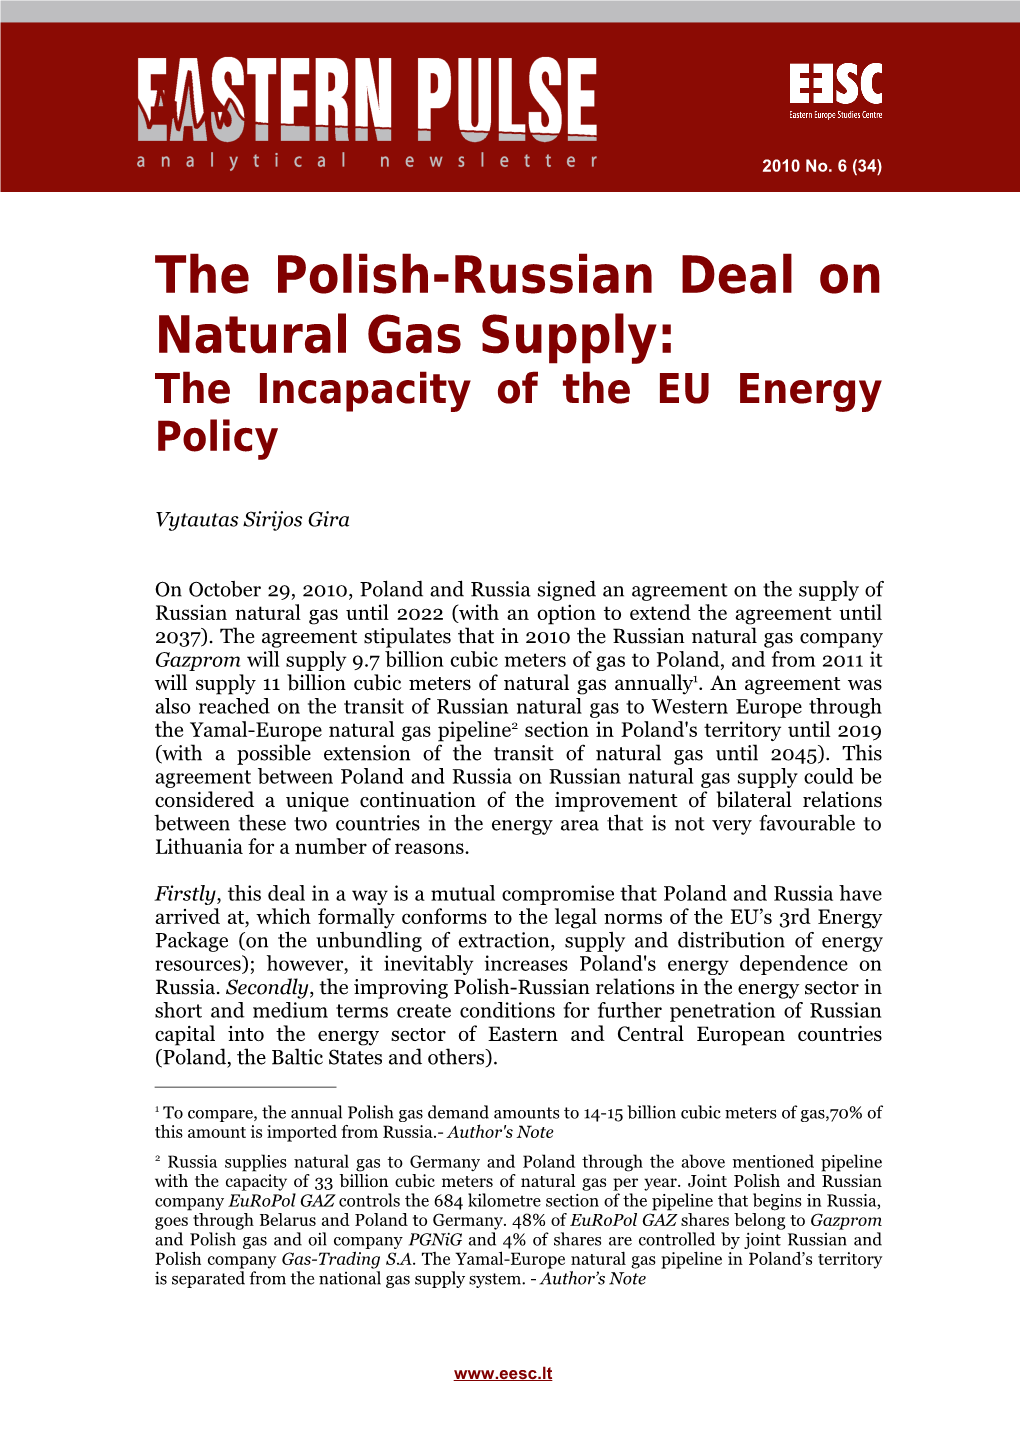 The Polish-Russian Deal on Natural Gas Supply: the Incapacity of the EU Energy Policy